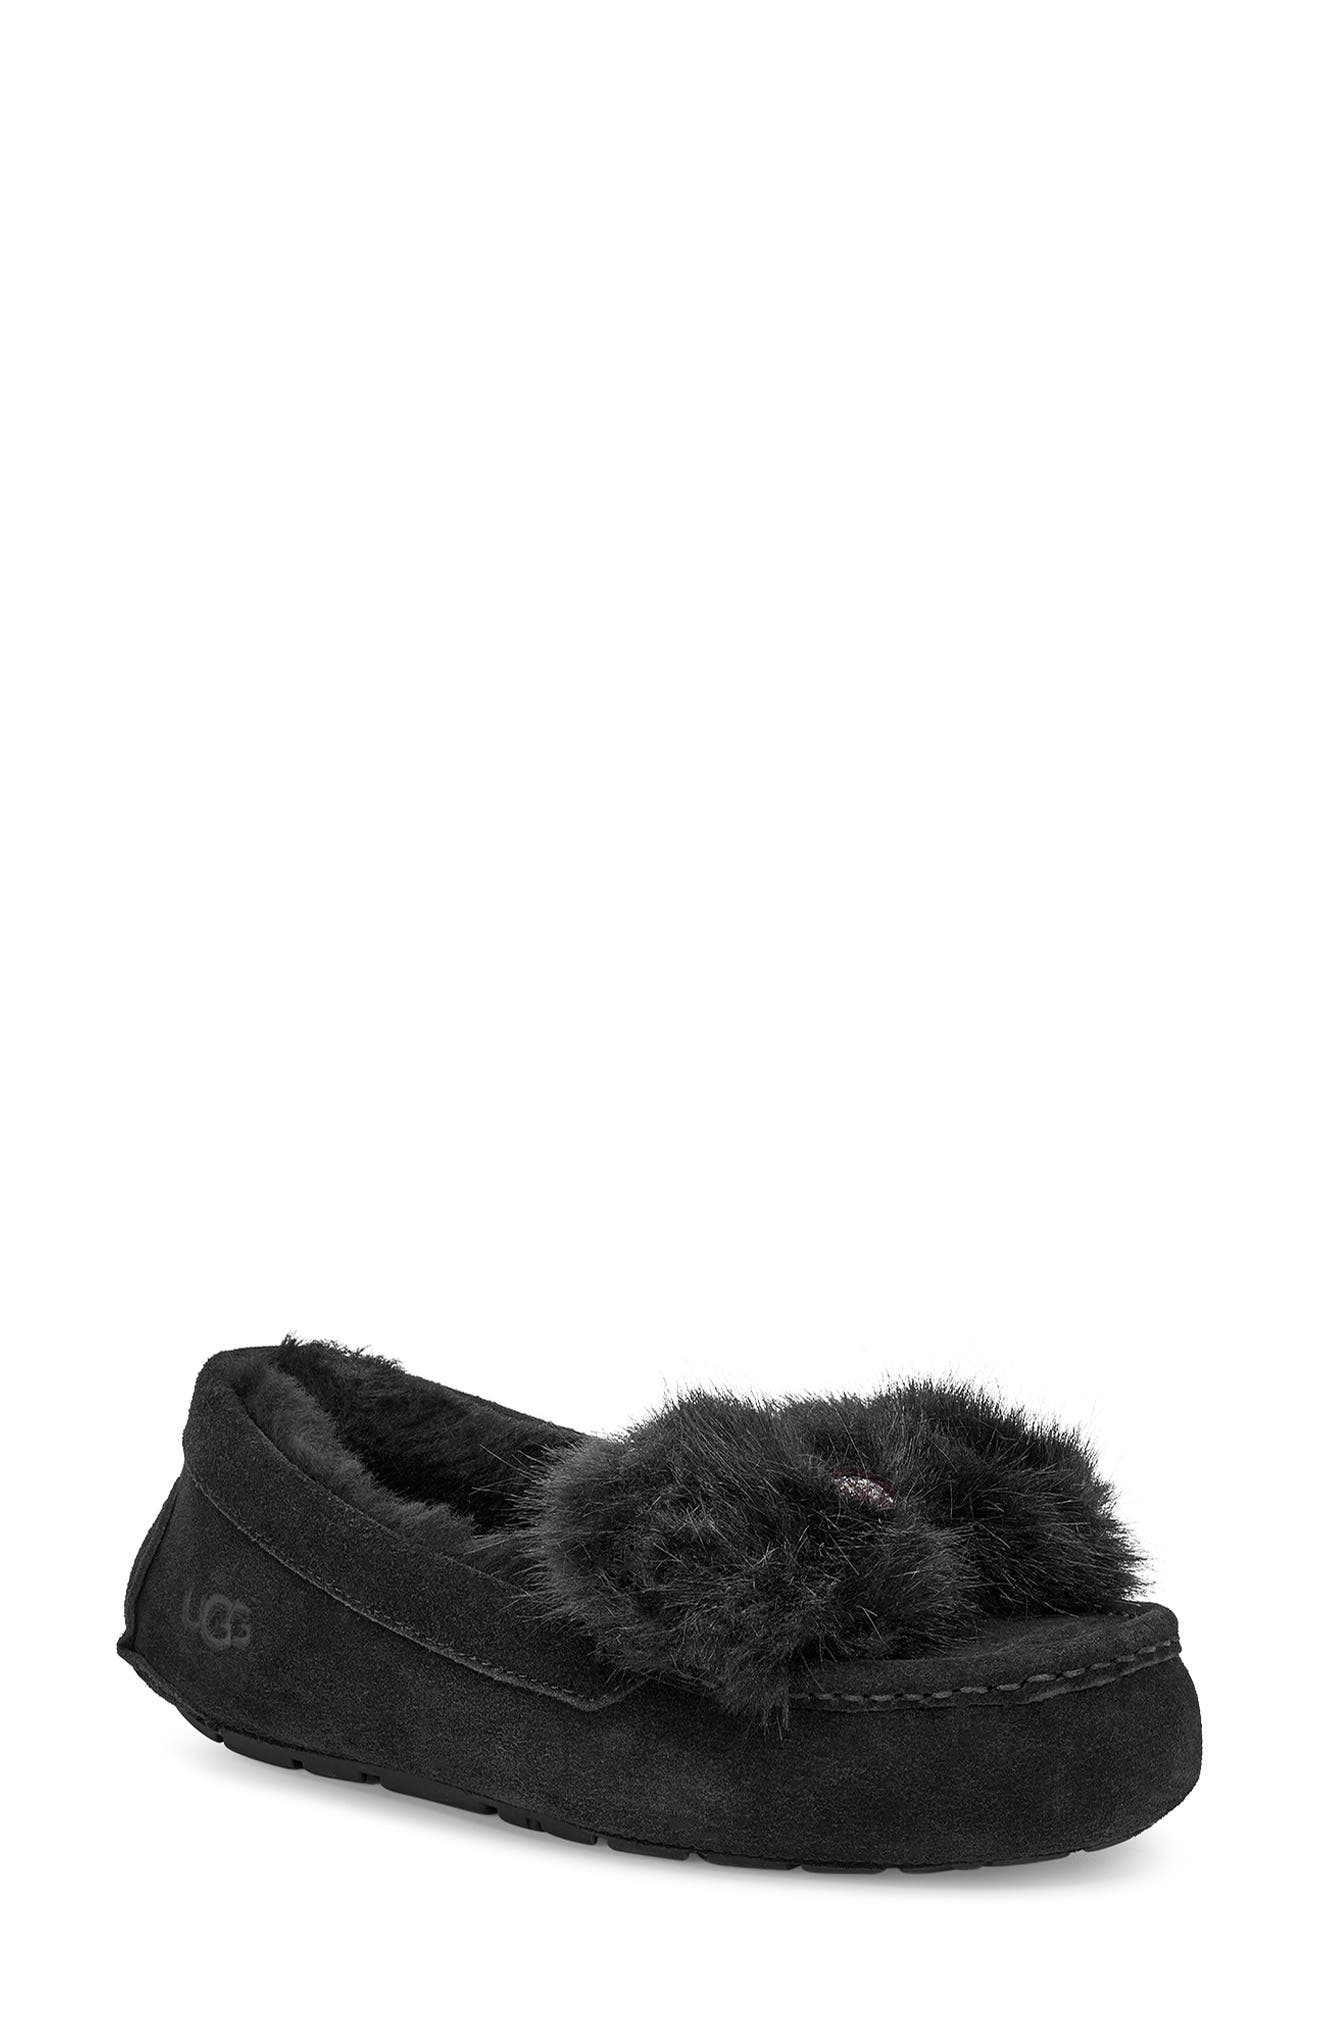 ugg ansley slippers with bow